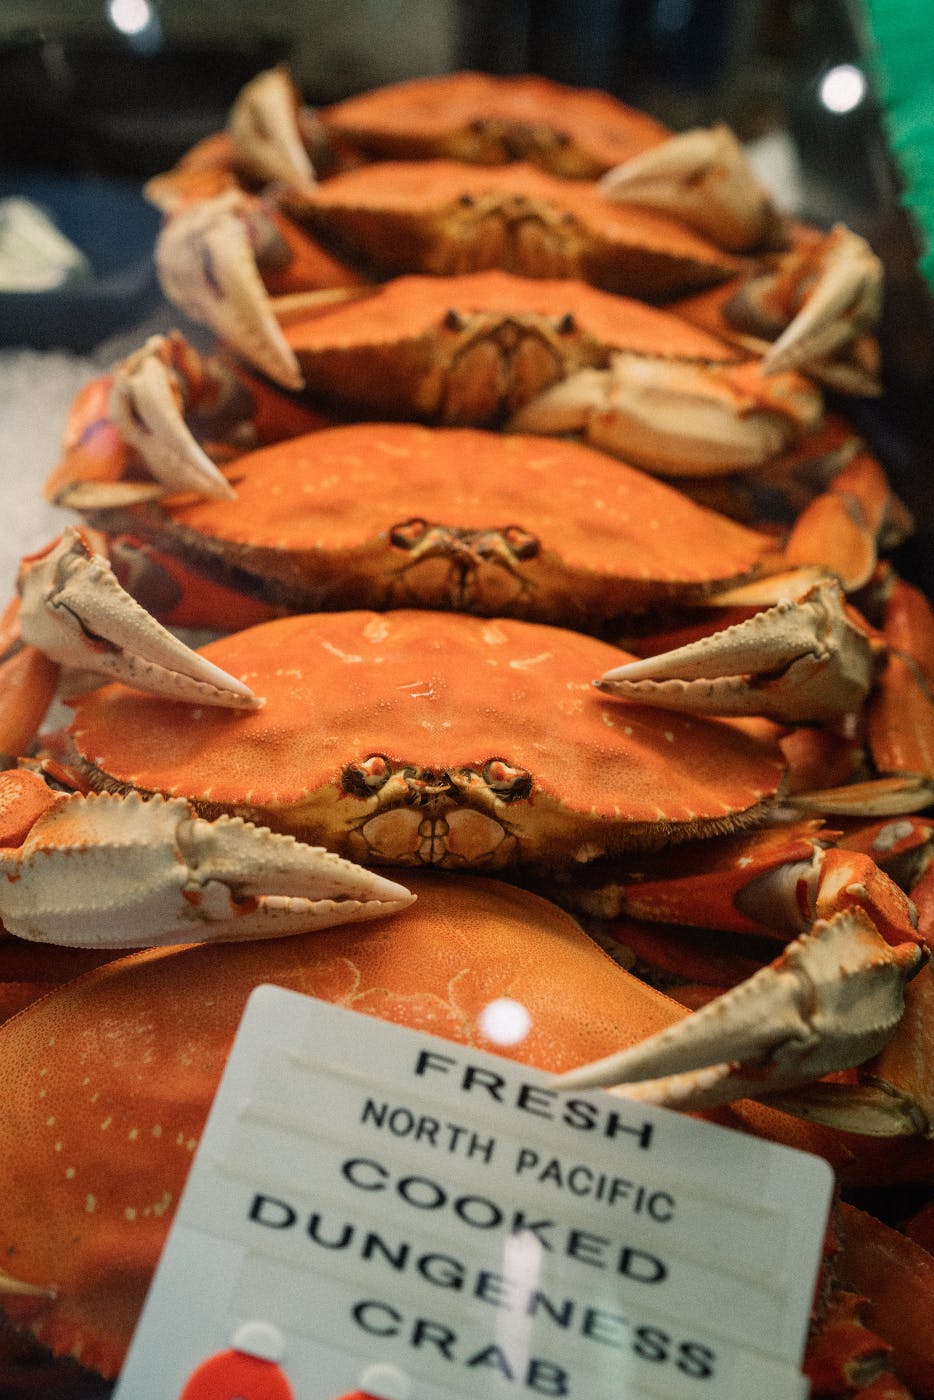 A row of Dungeness crabs in a display case